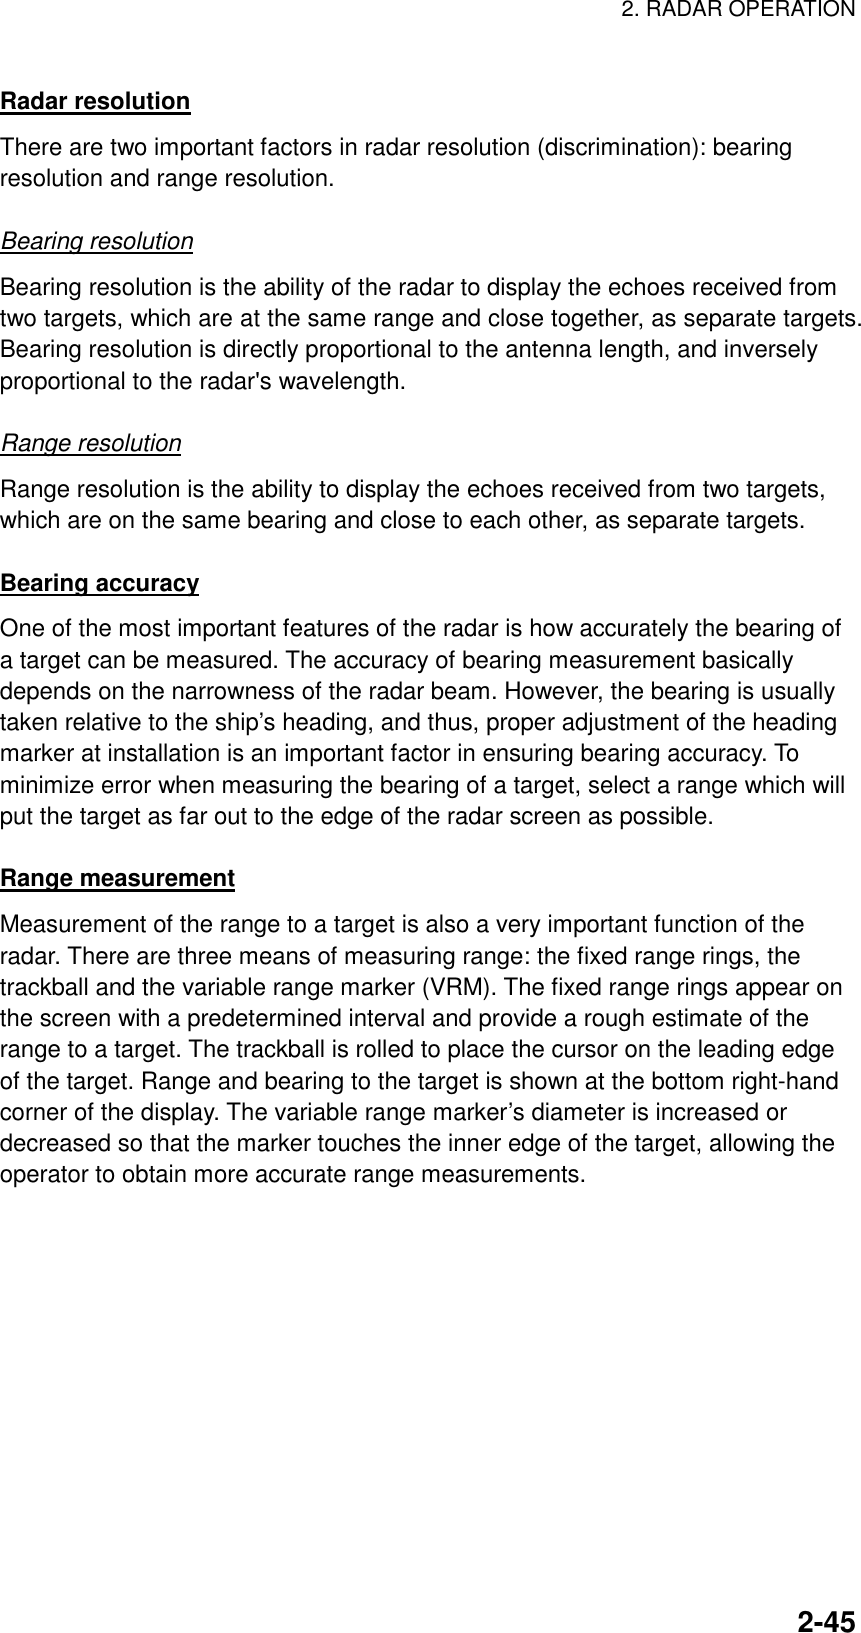 2. RADAR OPERATION    2-45Radar resolution There are two important factors in radar resolution (discrimination): bearing resolution and range resolution.  Bearing resolution Bearing resolution is the ability of the radar to display the echoes received from two targets, which are at the same range and close together, as separate targets. Bearing resolution is directly proportional to the antenna length, and inversely proportional to the radar&apos;s wavelength.  Range resolution Range resolution is the ability to display the echoes received from two targets, which are on the same bearing and close to each other, as separate targets.  Bearing accuracy One of the most important features of the radar is how accurately the bearing of a target can be measured. The accuracy of bearing measurement basically depends on the narrowness of the radar beam. However, the bearing is usually taken relative to the ship’s heading, and thus, proper adjustment of the heading marker at installation is an important factor in ensuring bearing accuracy. To minimize error when measuring the bearing of a target, select a range which will put the target as far out to the edge of the radar screen as possible.  Range measurement Measurement of the range to a target is also a very important function of the radar. There are three means of measuring range: the fixed range rings, the trackball and the variable range marker (VRM). The fixed range rings appear on the screen with a predetermined interval and provide a rough estimate of the range to a target. The trackball is rolled to place the cursor on the leading edge of the target. Range and bearing to the target is shown at the bottom right-hand corner of the display. The variable range marker’s diameter is increased or decreased so that the marker touches the inner edge of the target, allowing the operator to obtain more accurate range measurements. 